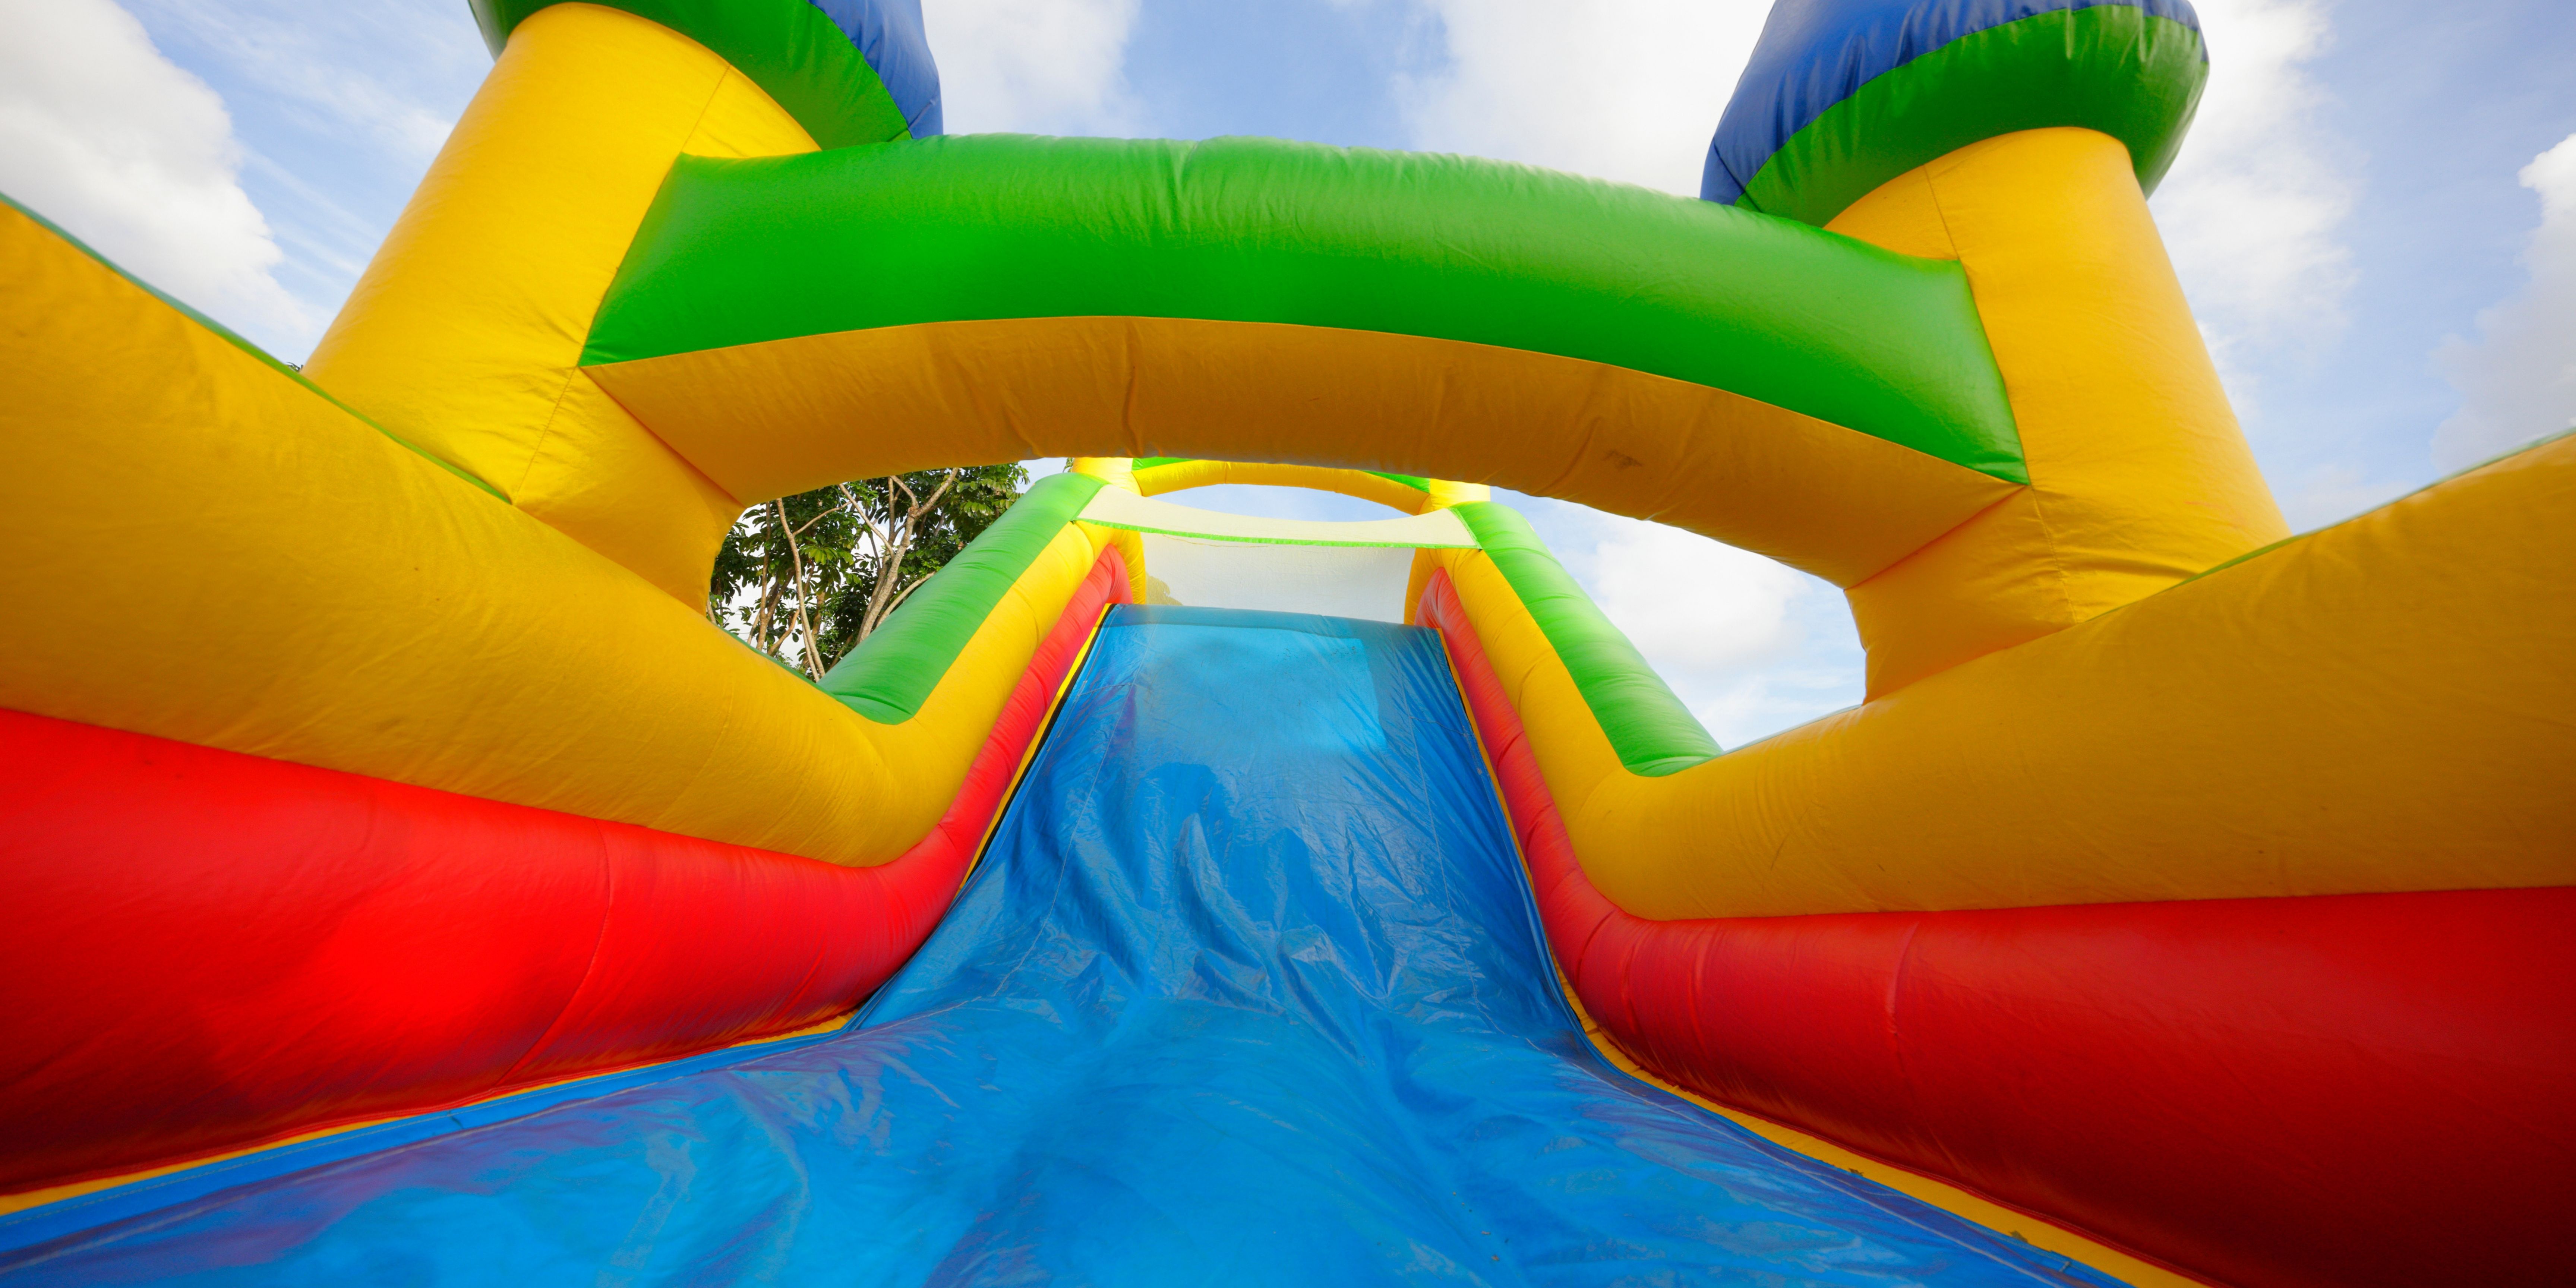 Colorful inflatable bounce house